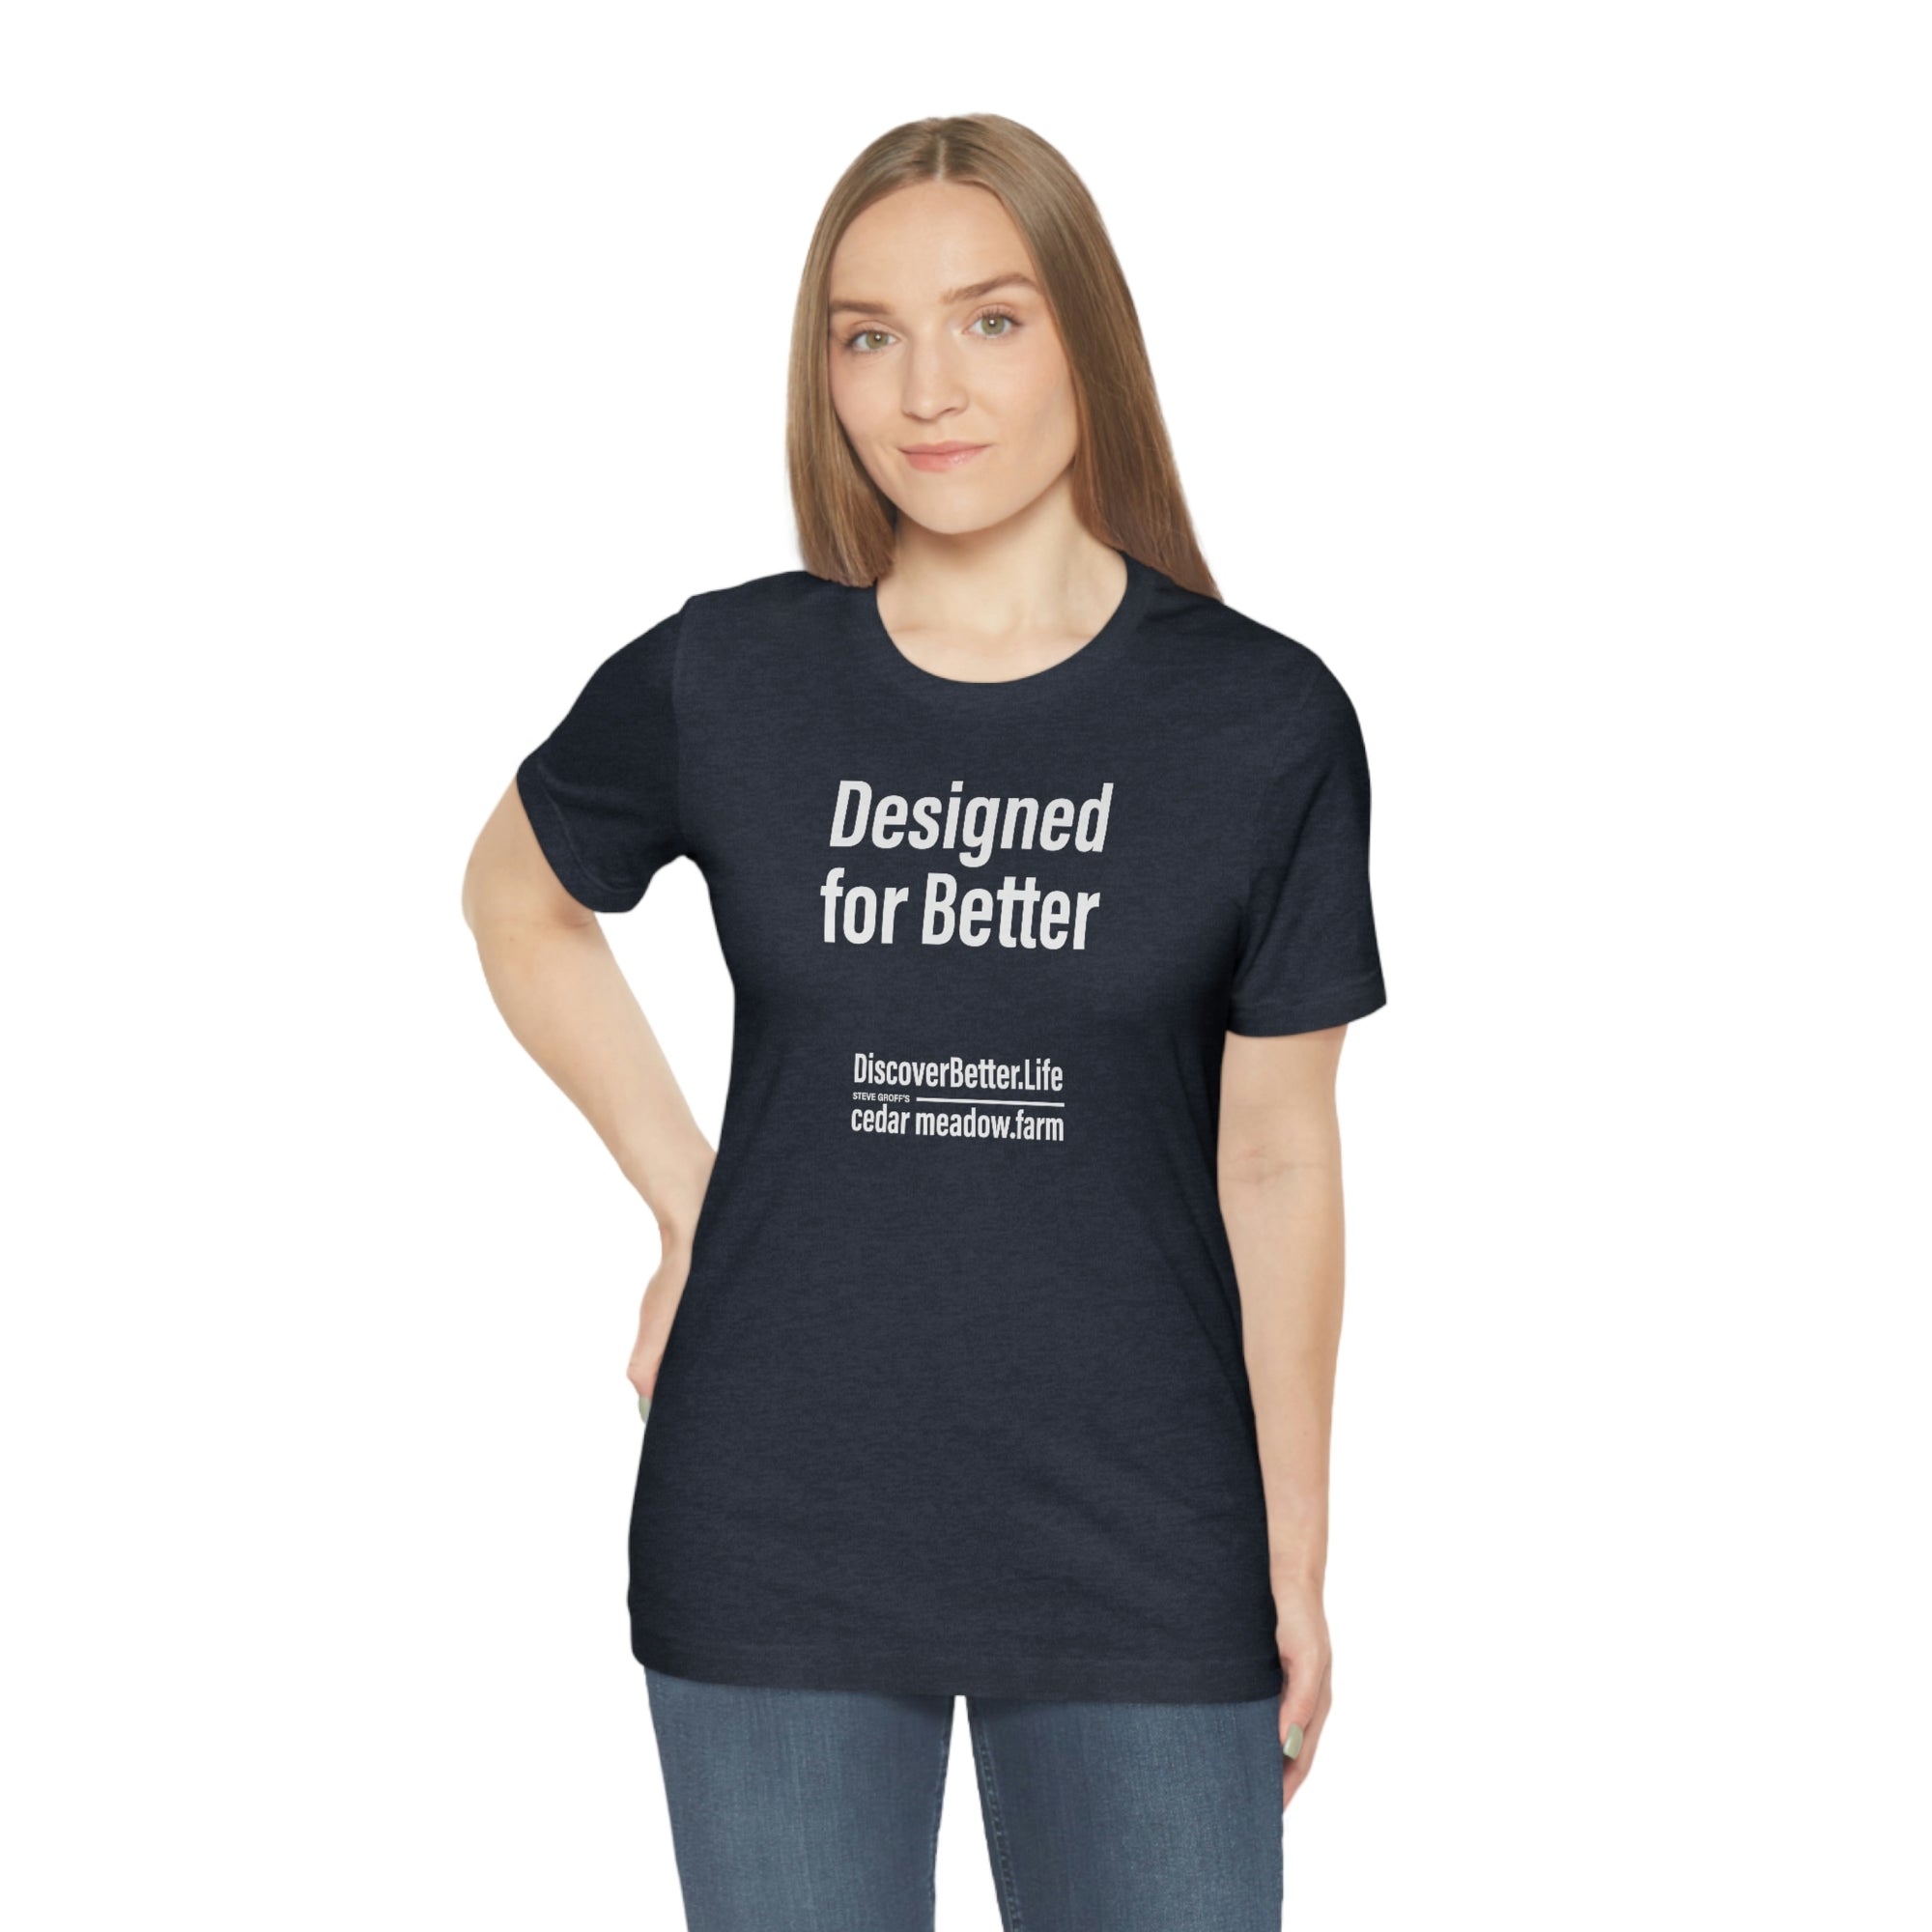 Designed for Better T-shirt-You know who you are. Feeling all the stresses, bumps and bruises of life, but pushing forward, because you know you're worth it. You're striving every day to make -Cedar Meadow Farm